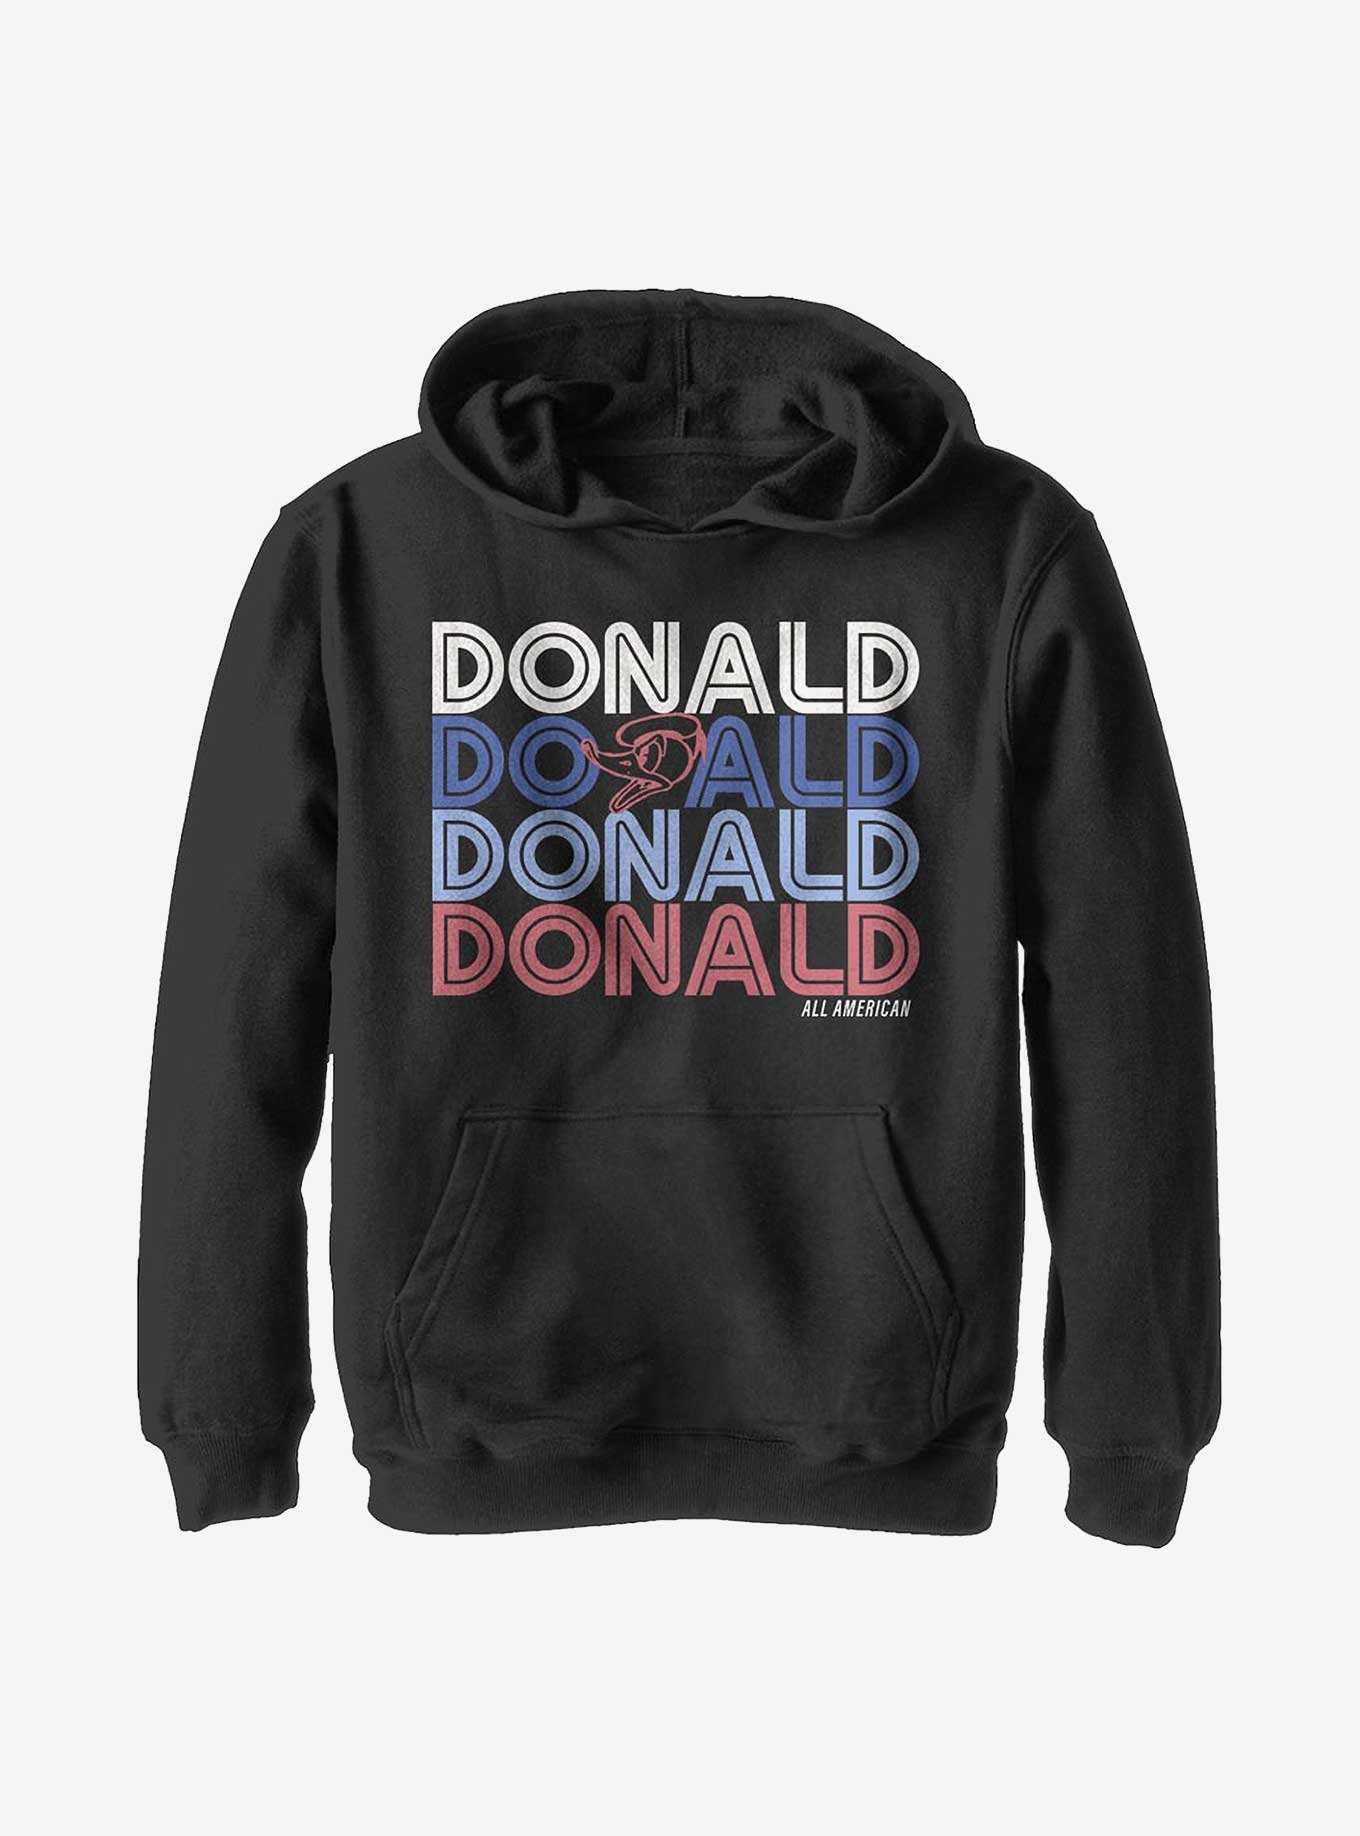 Disney Donald Duck Retro Stack Donald Youth Hoodie, , hi-res